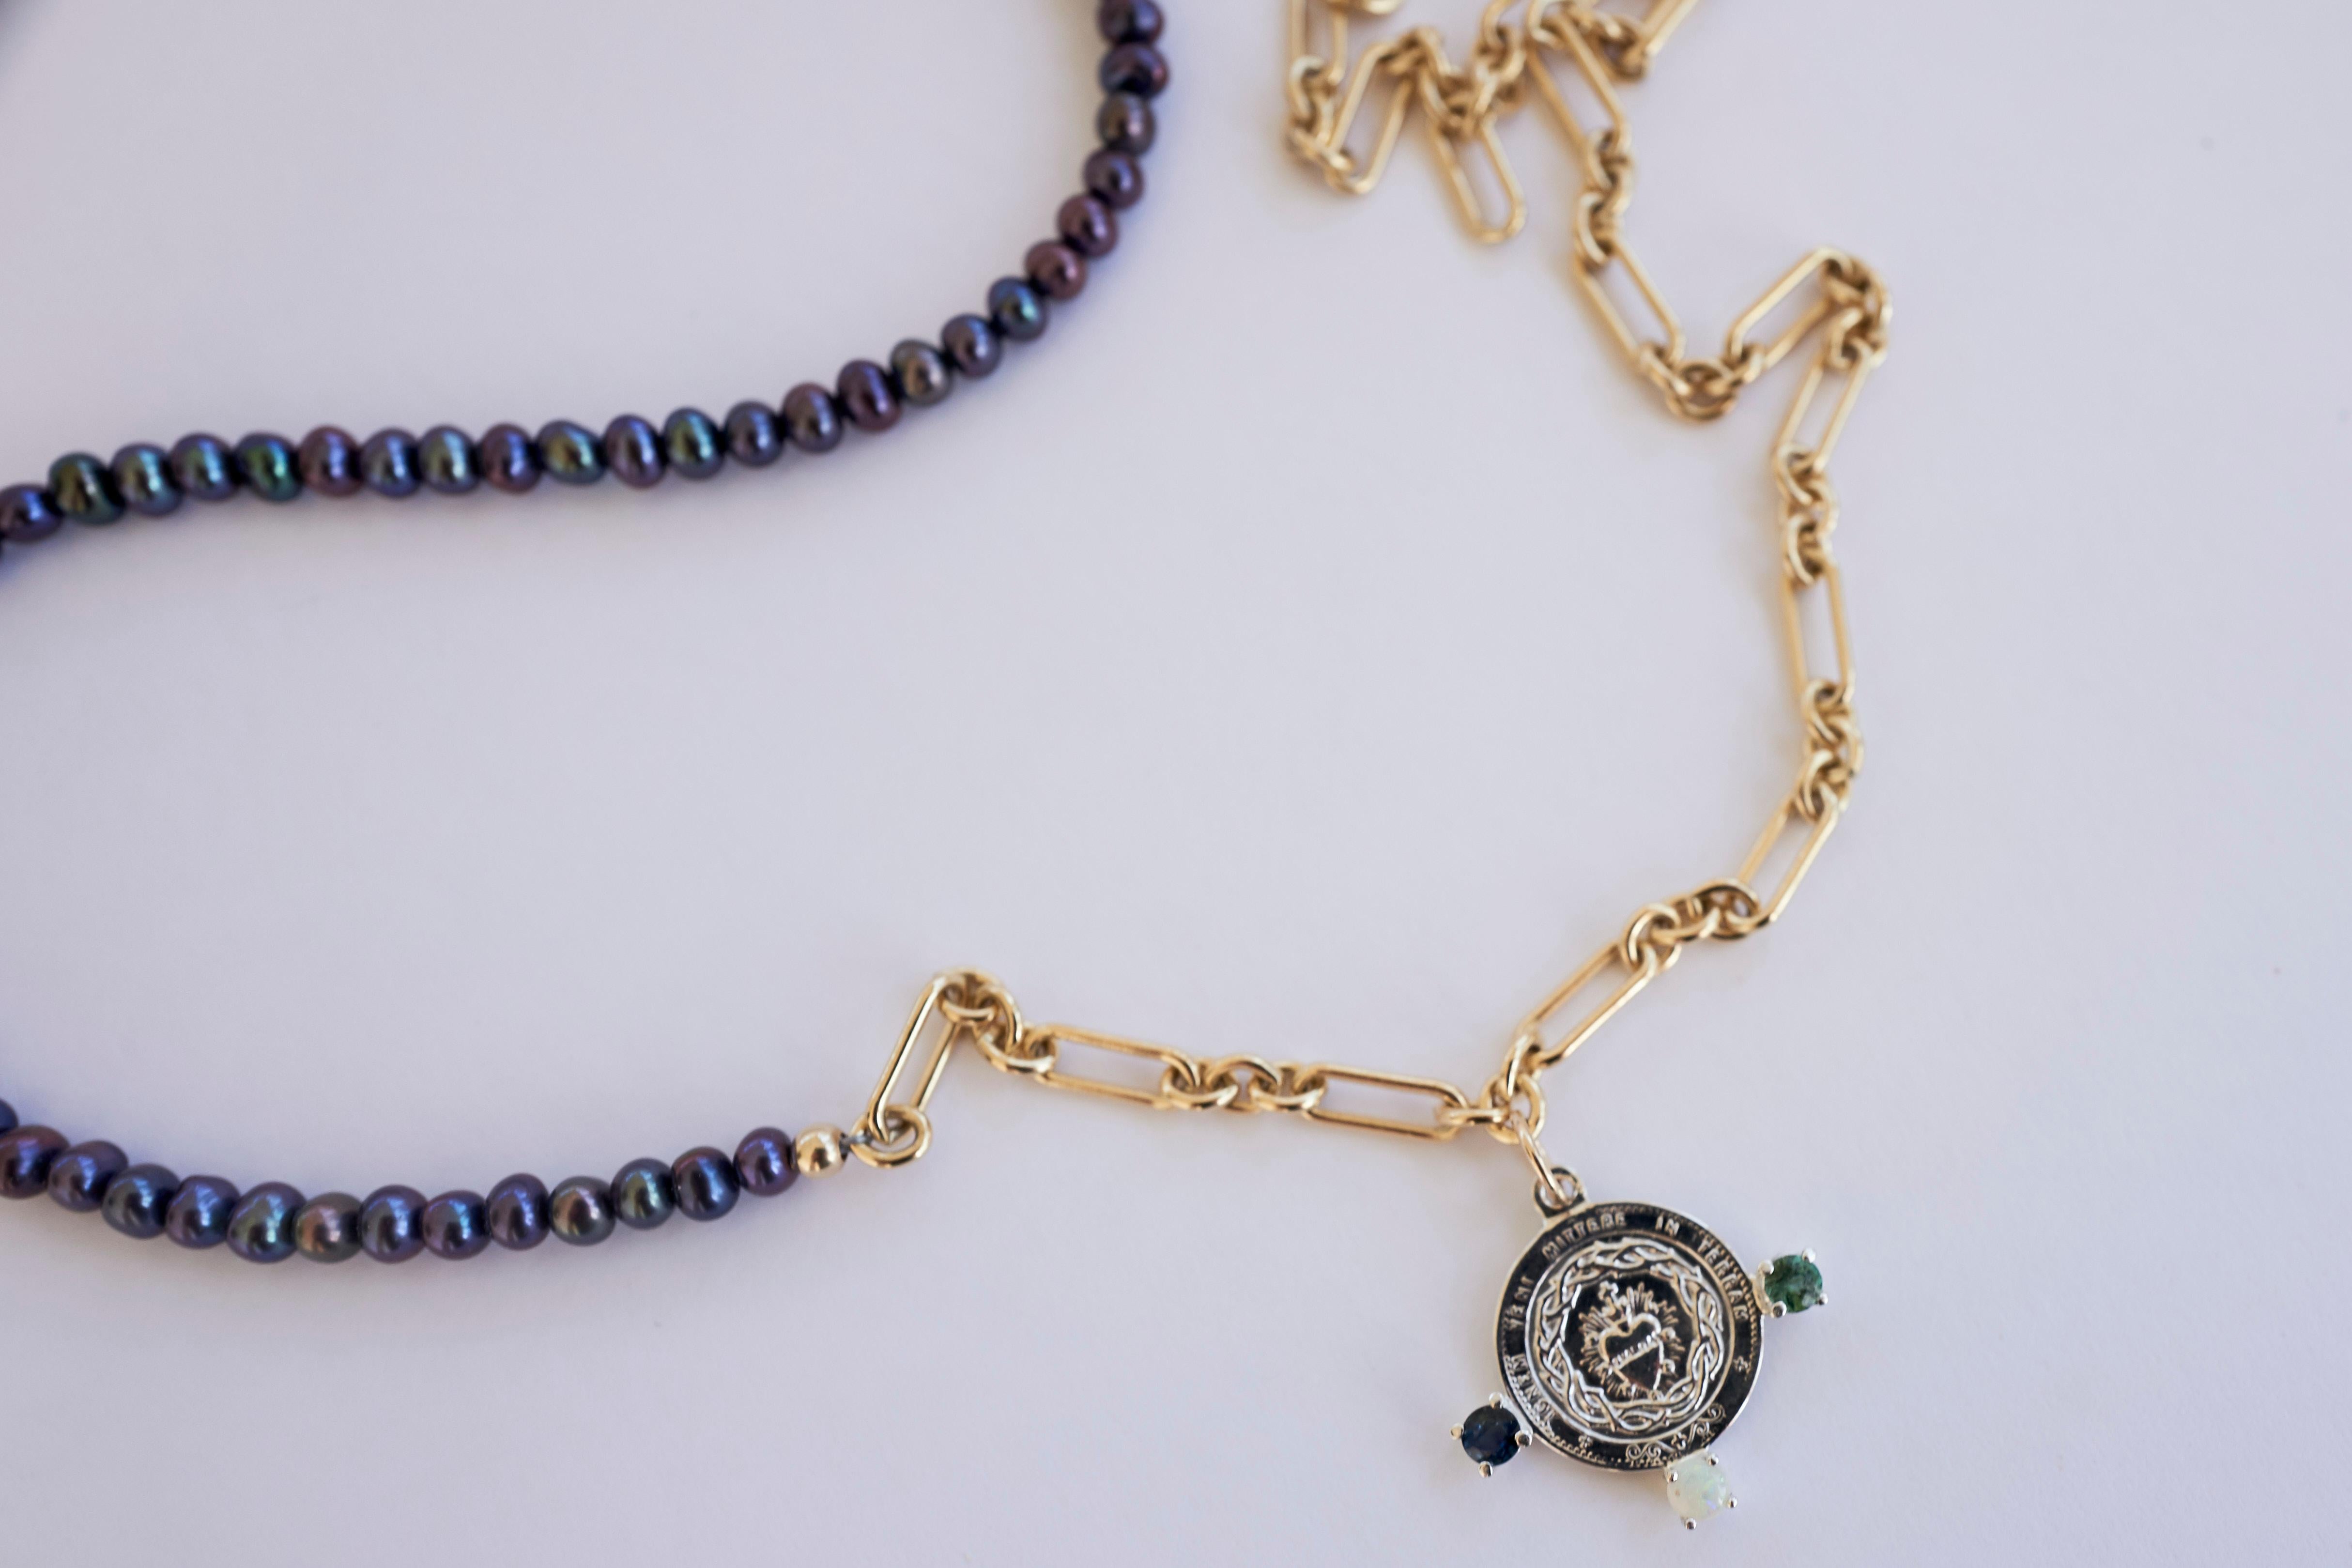 Opal Blue Green Tourmaline Sacred Heart Medal Coin Silver Black Pearl Tanzanite Beads Gold Filled Chain Necklace

The Sacred Heart (also known as the Sacred Heart of Jesus) has one of the deepest meanings in the Roman Catholic practice. The symbol